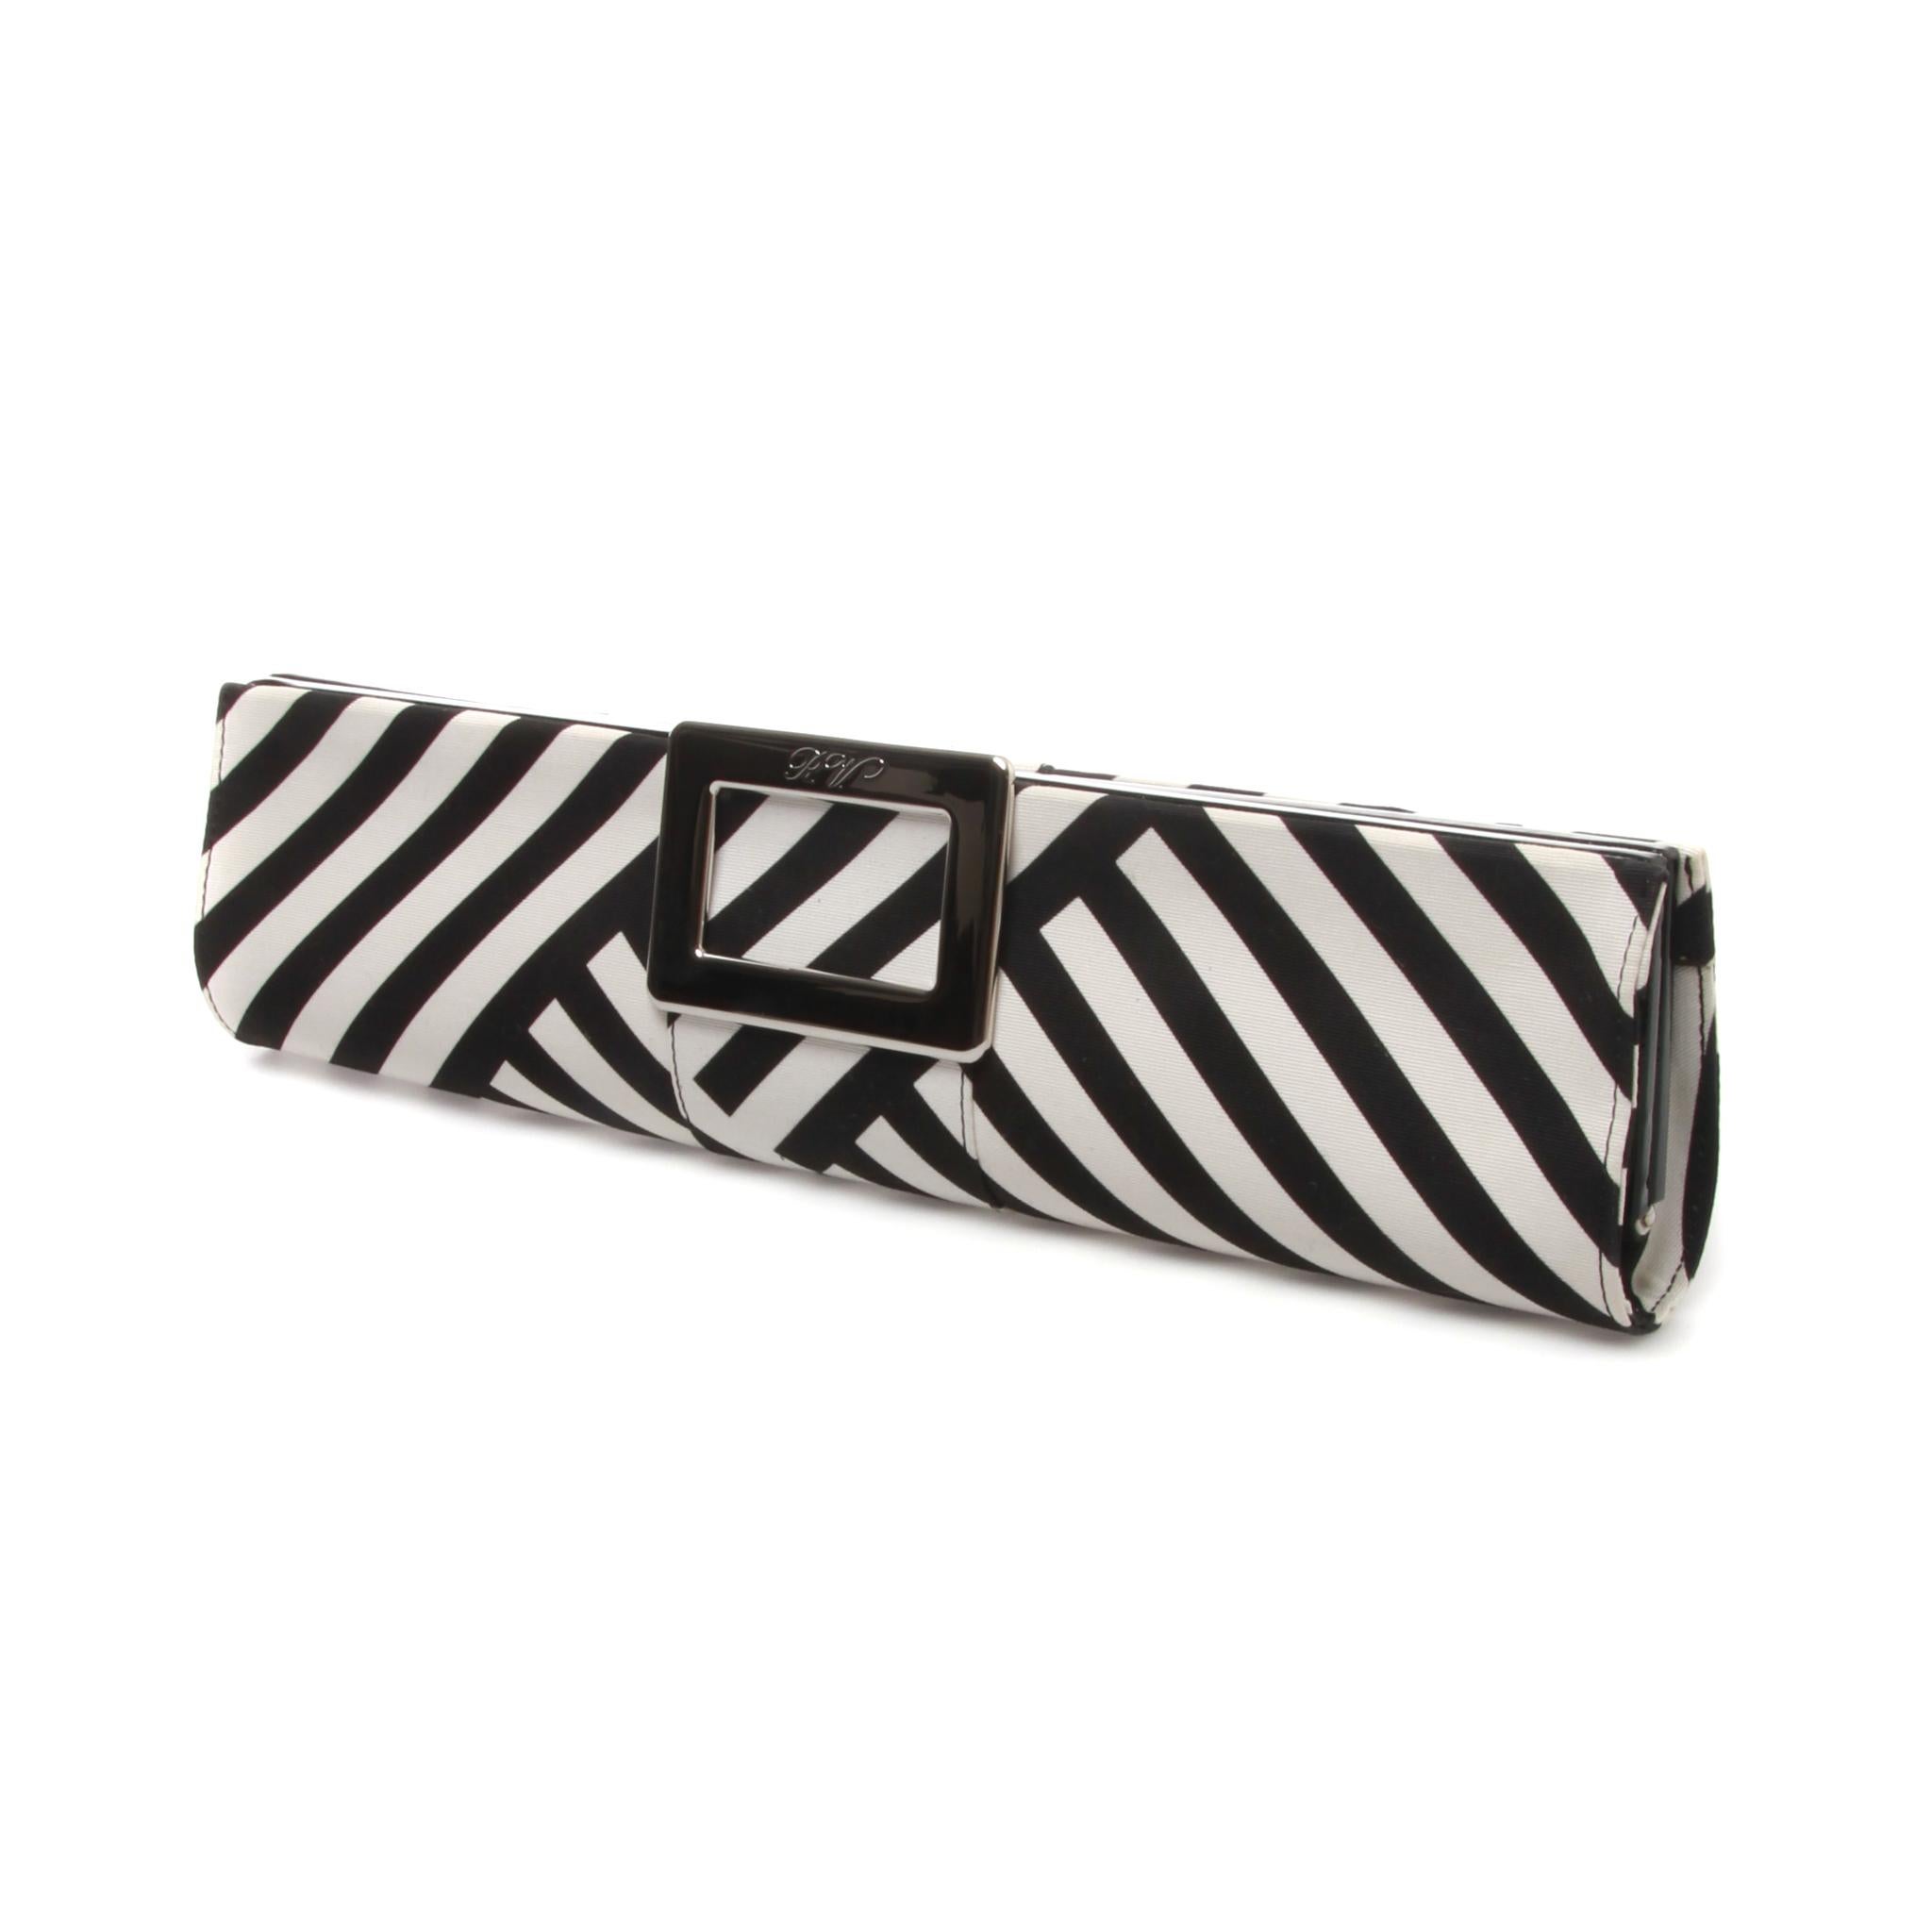 Another elegant yet fun piece from Roger Vivier! 
This clutch has a signature silhouette and can be carried at any daytime or evening event!
Made of black and white asymmetrical striped cotton, this accordion-opening style bag is soft and is lined